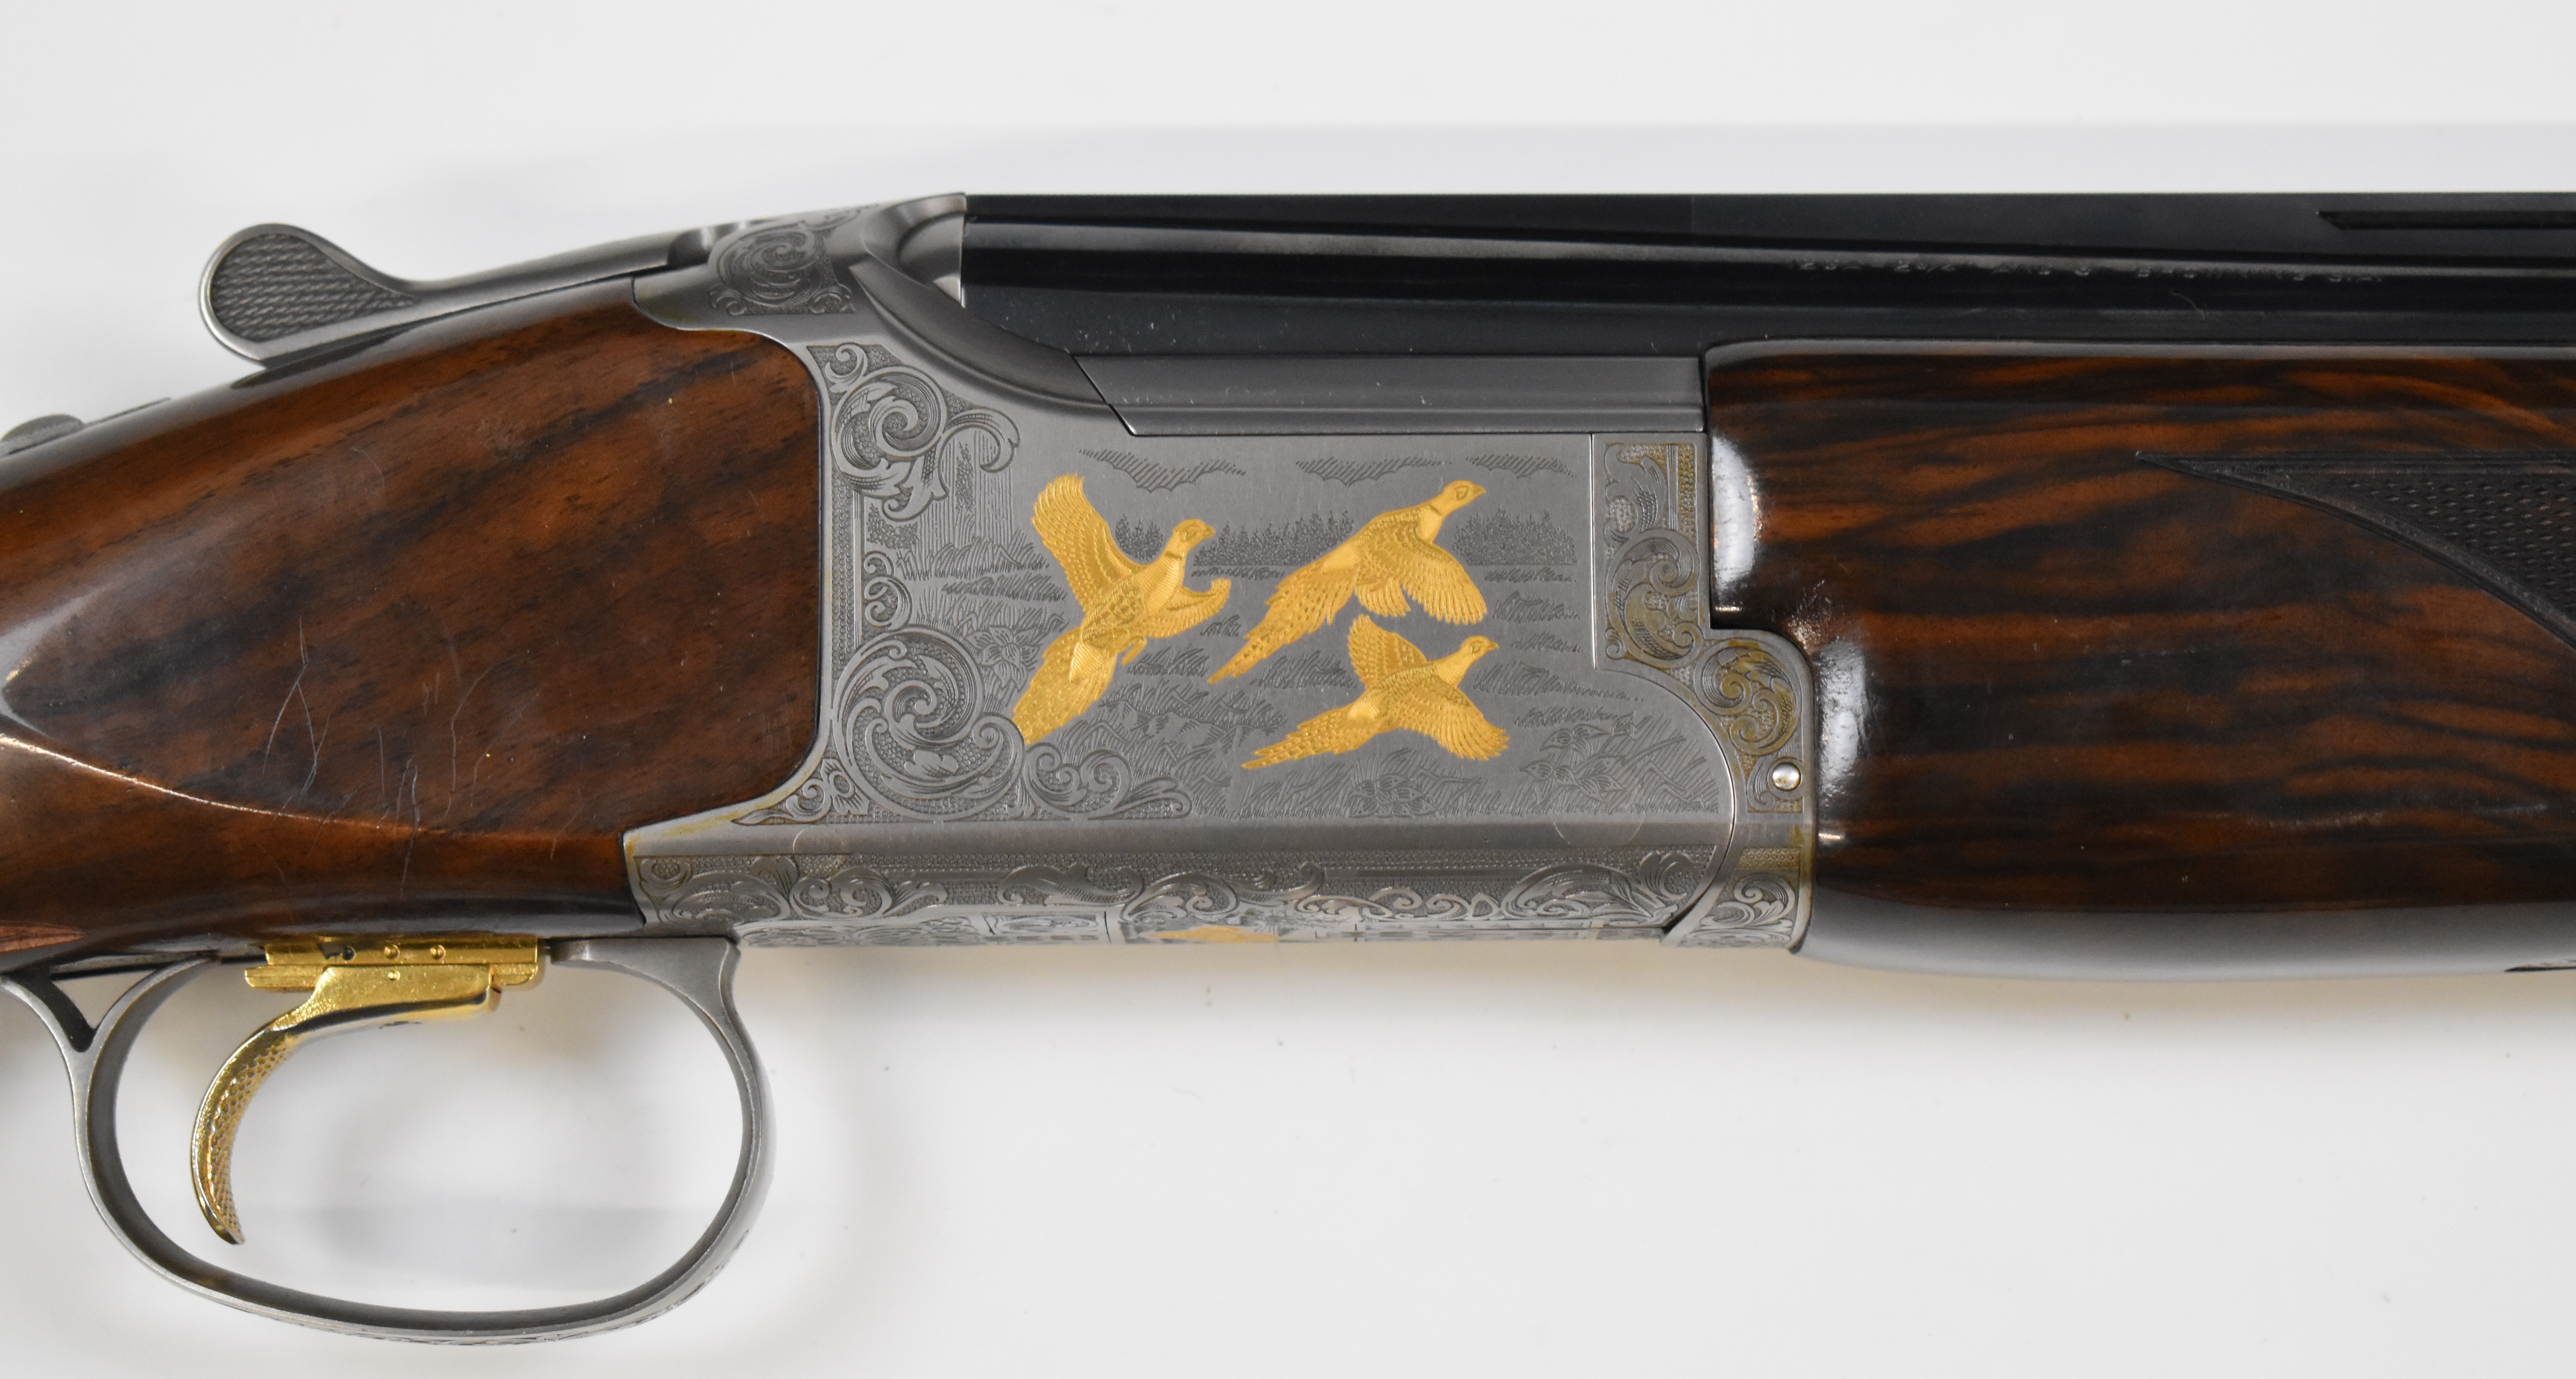 Browning B525 Ultimate 12 bore over and under ejector shotgun with gold engraving of birds - Image 6 of 12